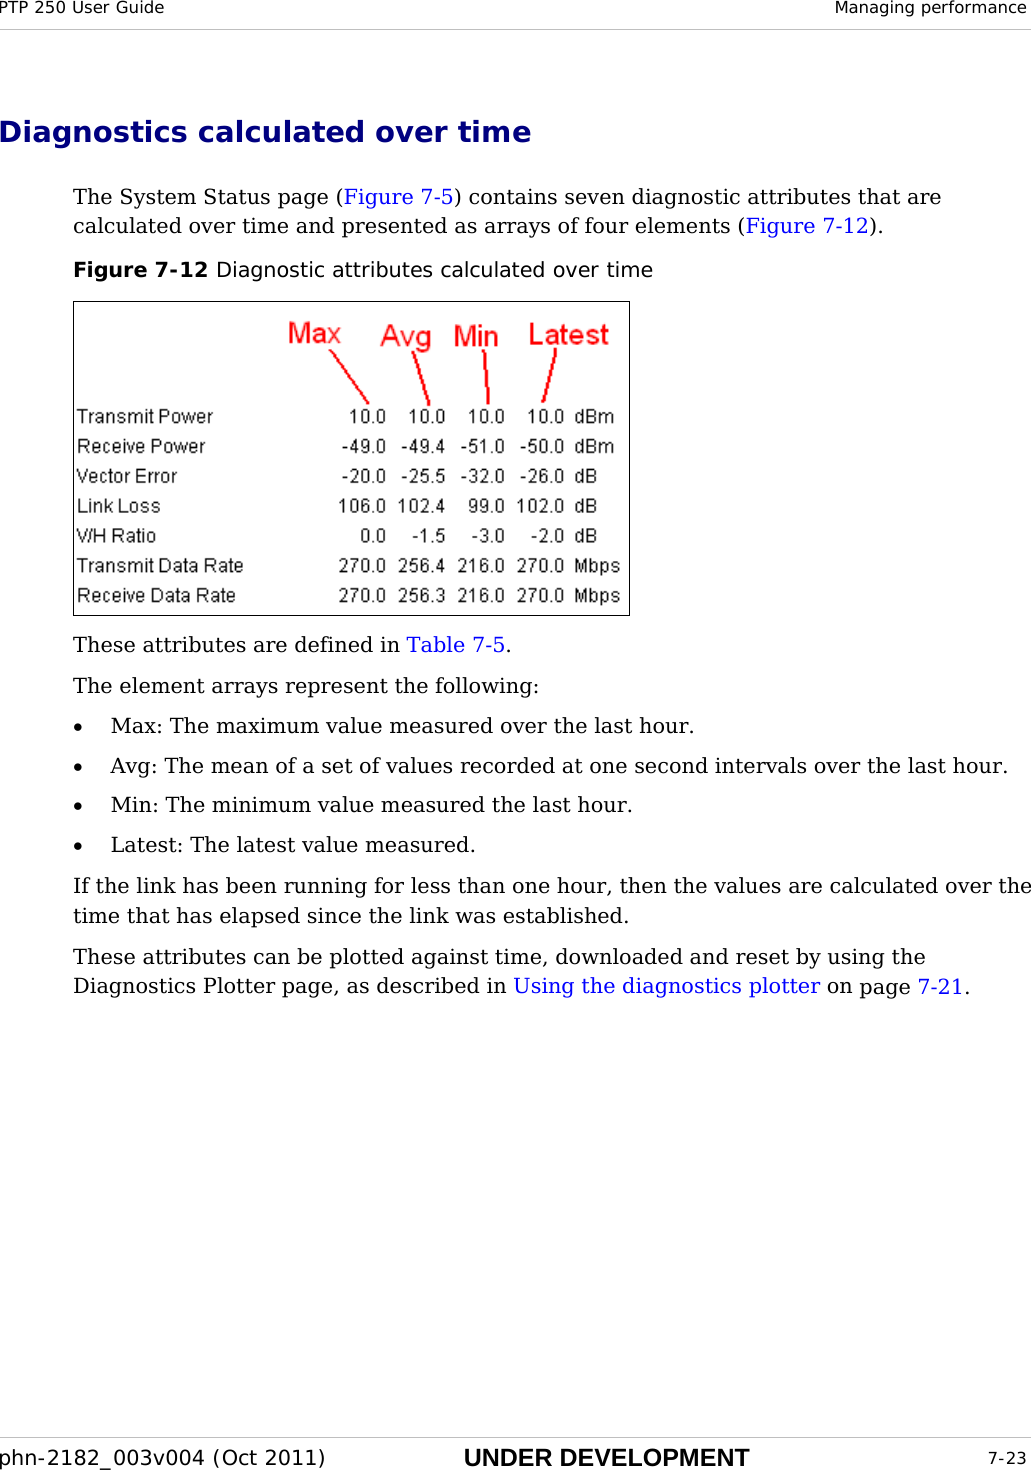 PTP 250 User Guide  Managing performance  phn-2182_003v004 (Oct 2011)  UNDER DEVELOPMENT  7-23  Diagnostics calculated over time The System Status page (Figure 7-5) contains seven diagnostic attributes that are calculated over time and presented as arrays of four elements (Figure 7-12). Figure 7-12 Diagnostic attributes calculated over time  These attributes are defined in Table 7-5. The element arrays represent the following: • Max: The maximum value measured over the last hour. • Avg: The mean of a set of values recorded at one second intervals over the last hour. • Min: The minimum value measured the last hour. • Latest: The latest value measured.  If the link has been running for less than one hour, then the values are calculated over the time that has elapsed since the link was established.  These attributes can be plotted against time, downloaded and reset by using the Diagnostics Plotter page, as described in Using the diagnostics plotter on page 7-21.       